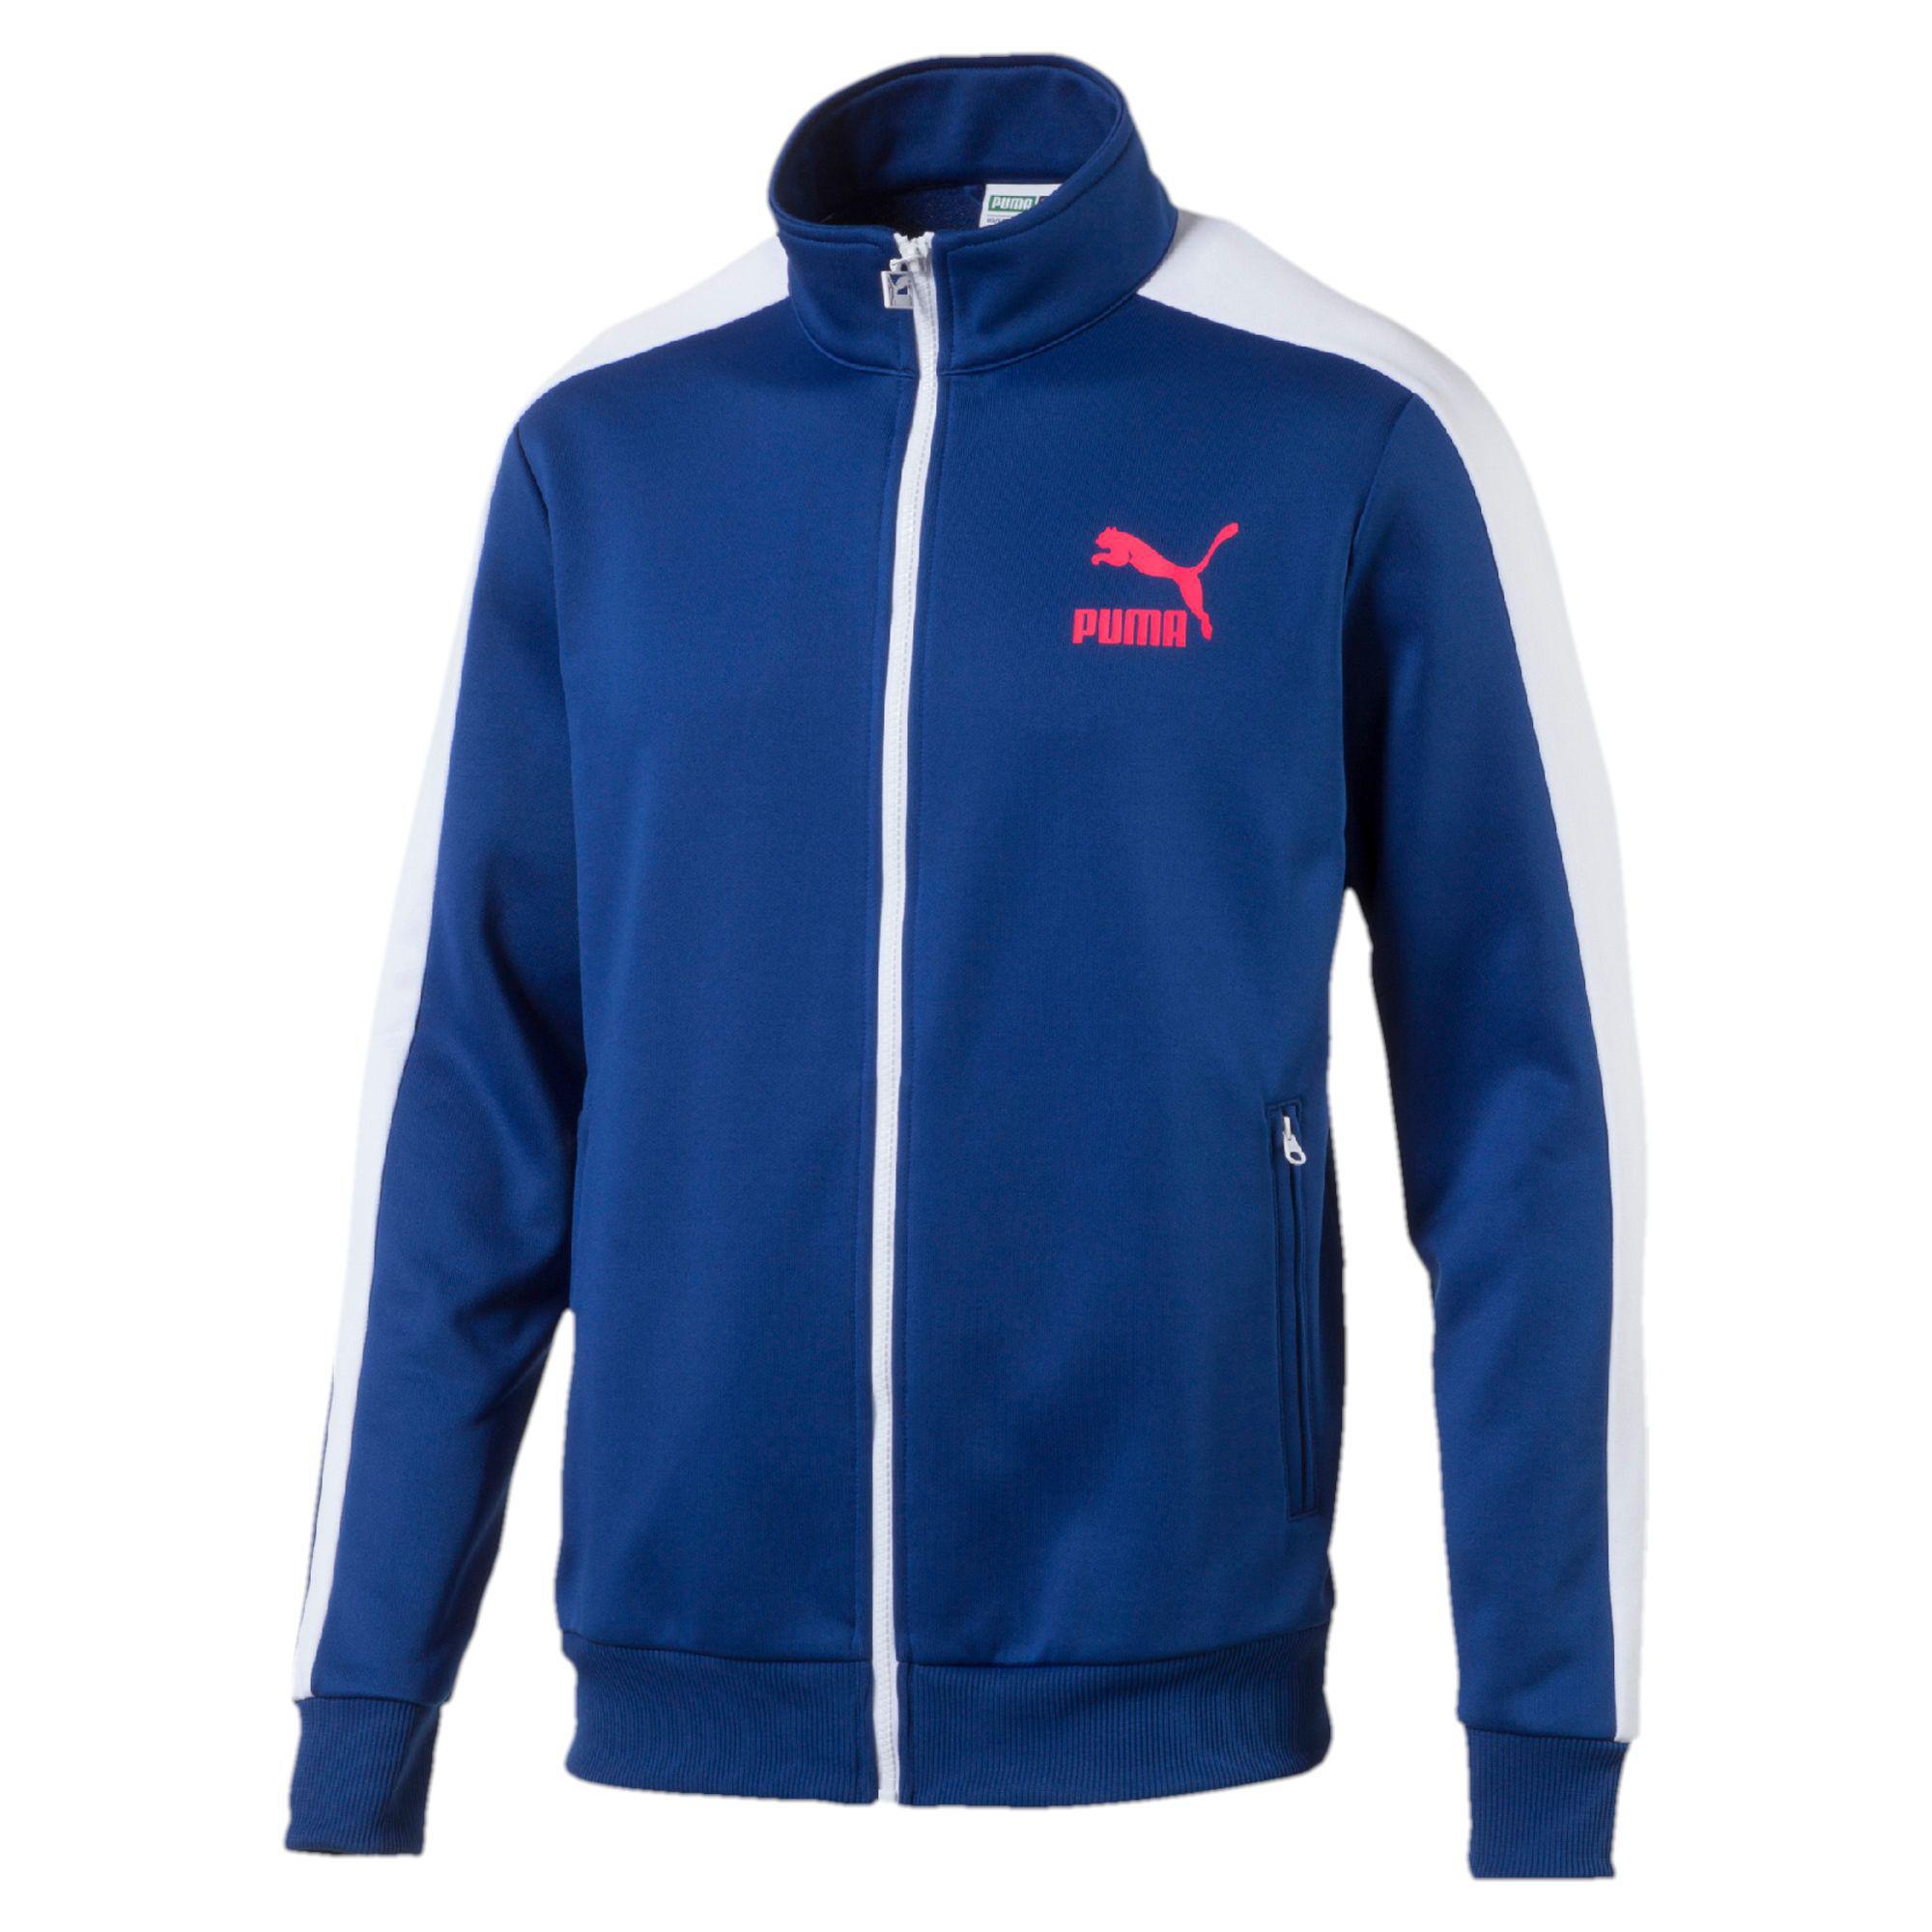 PUMA Cotton Archive T7 Track Jacket in Blue for Men - Lyst